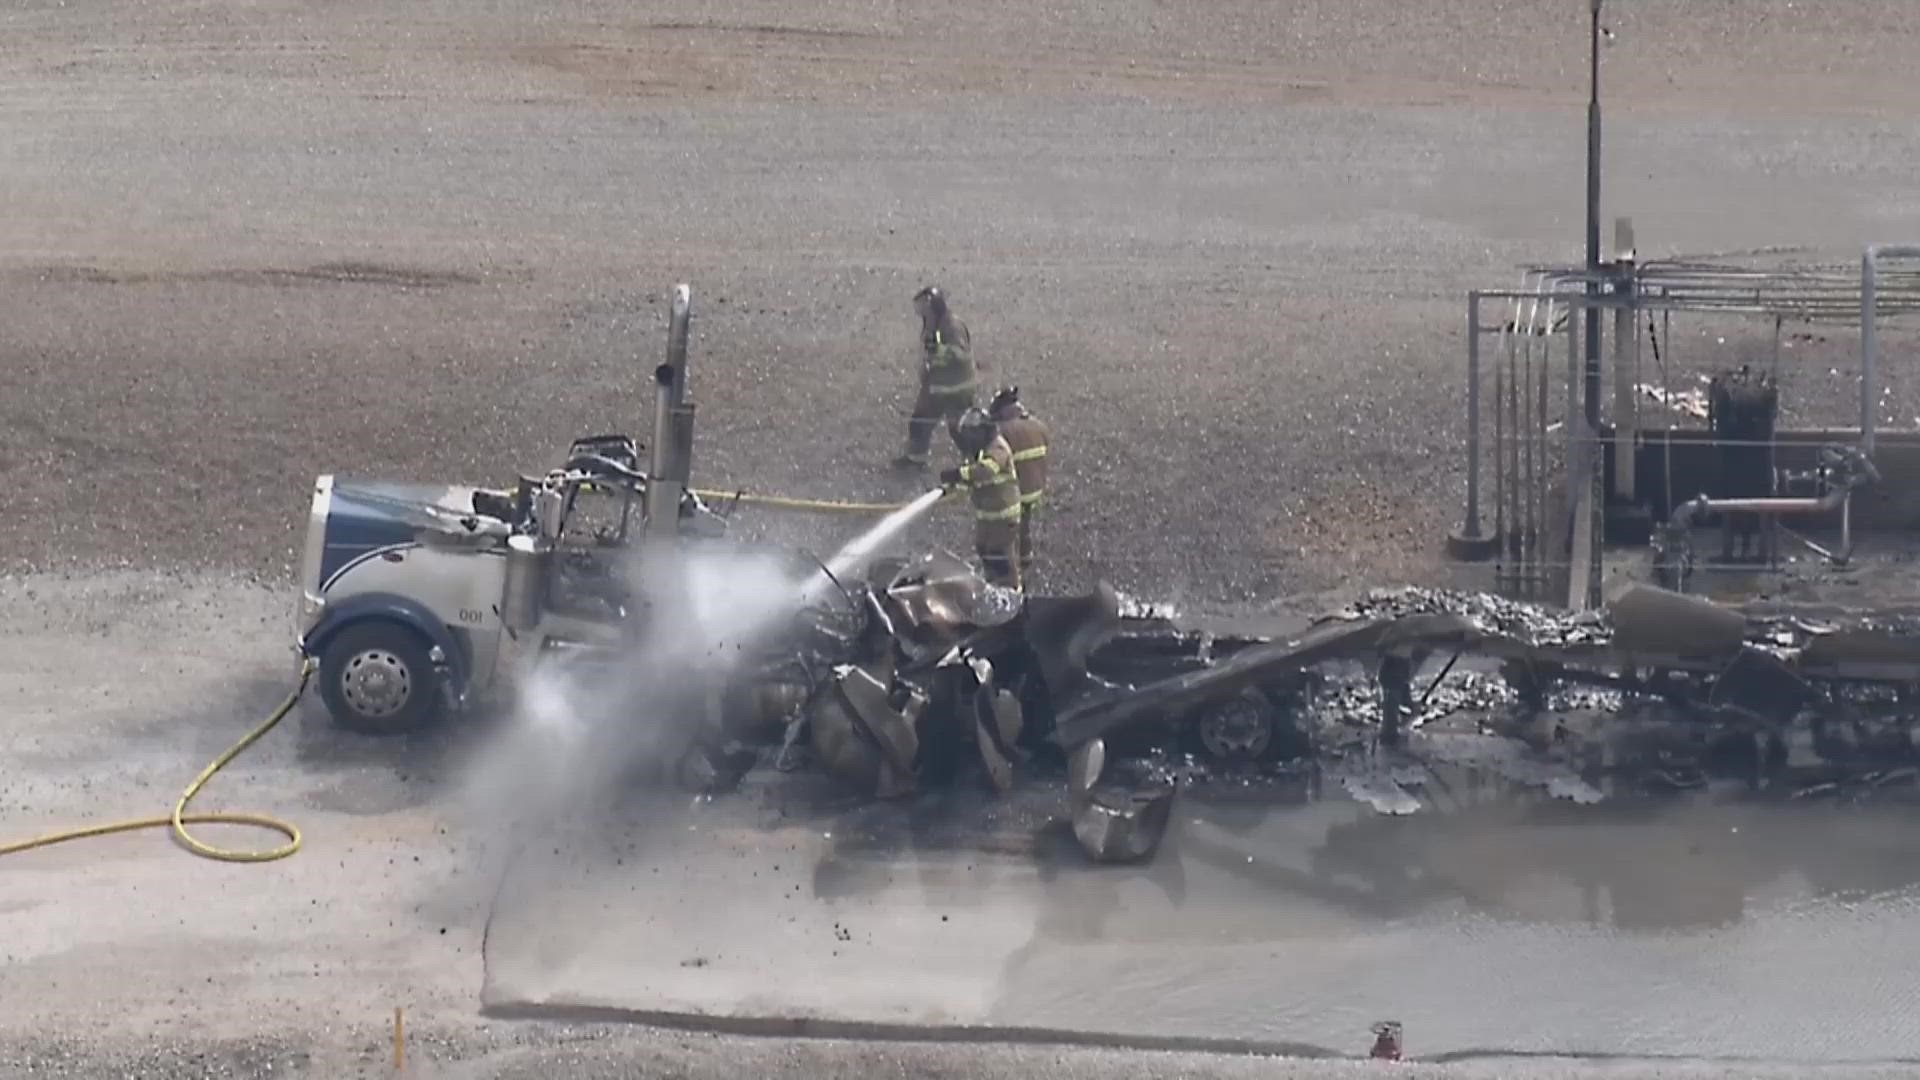 The Fort Worth Fire Department responded to a tanker truck fire on Wednesday. They say the truck was filled with jet fuel. There were no injuries reported.